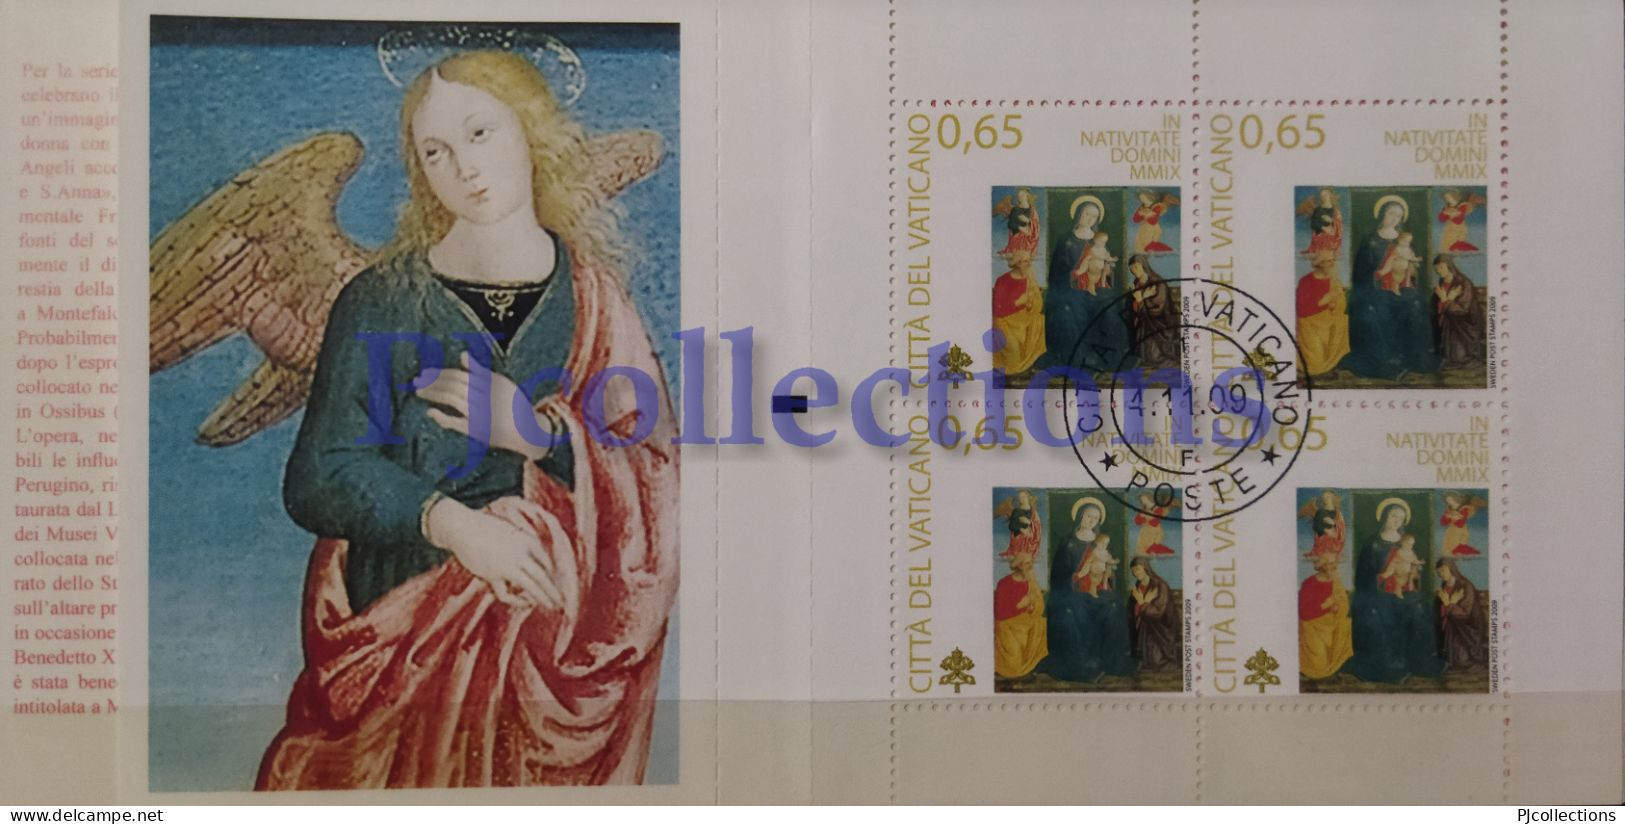 3763- VATICANO- VATICAN CITY 2009 NATALE - CHRISTMAS FULL BOOKLET 4 STAMPS C/ANNULLO 1° GIORNO - USED - Gebruikt